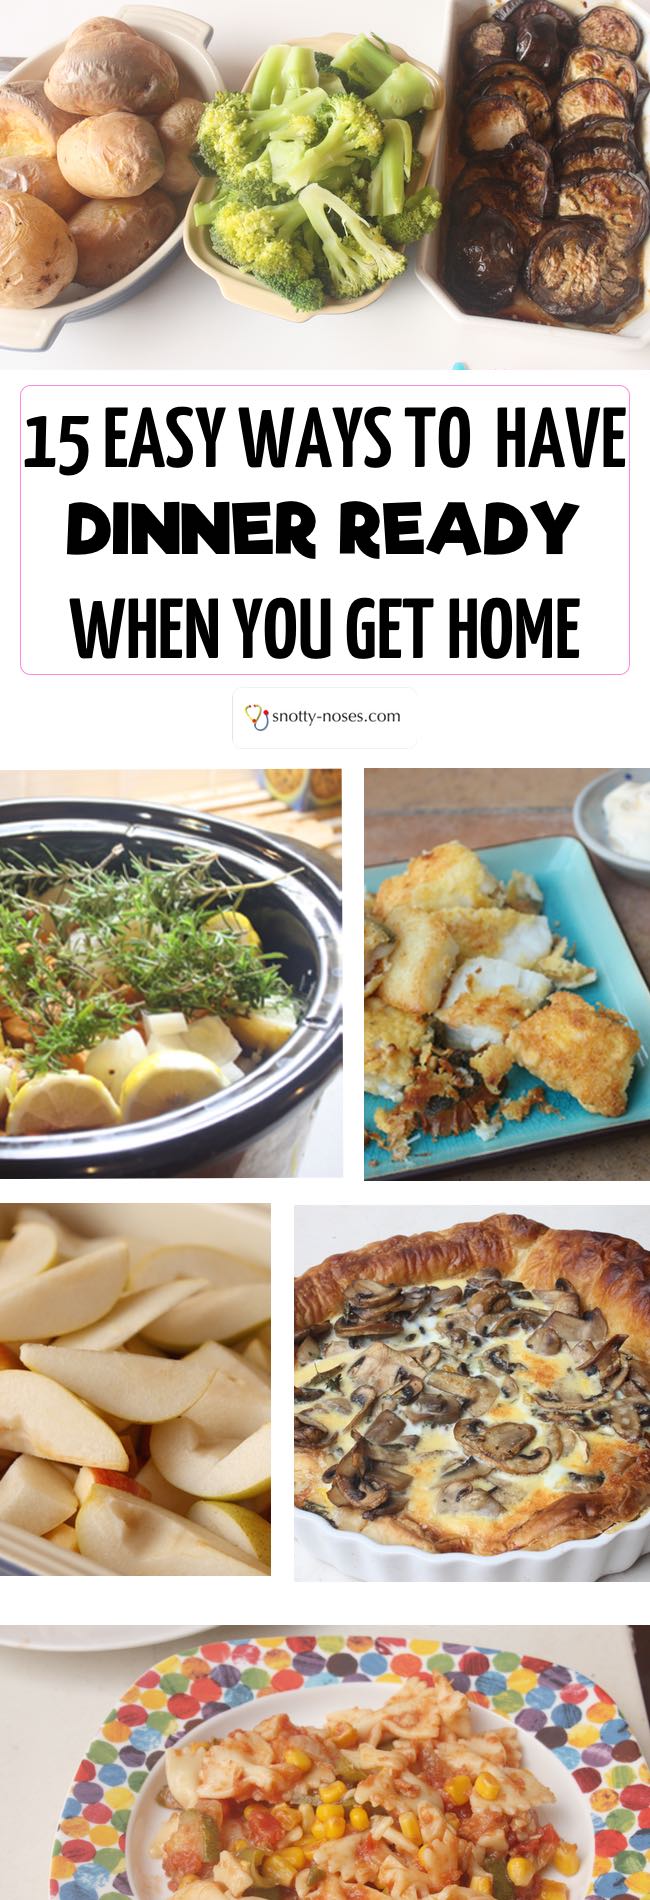 12 Easy Ways to Have Dinner Ready When you get Home